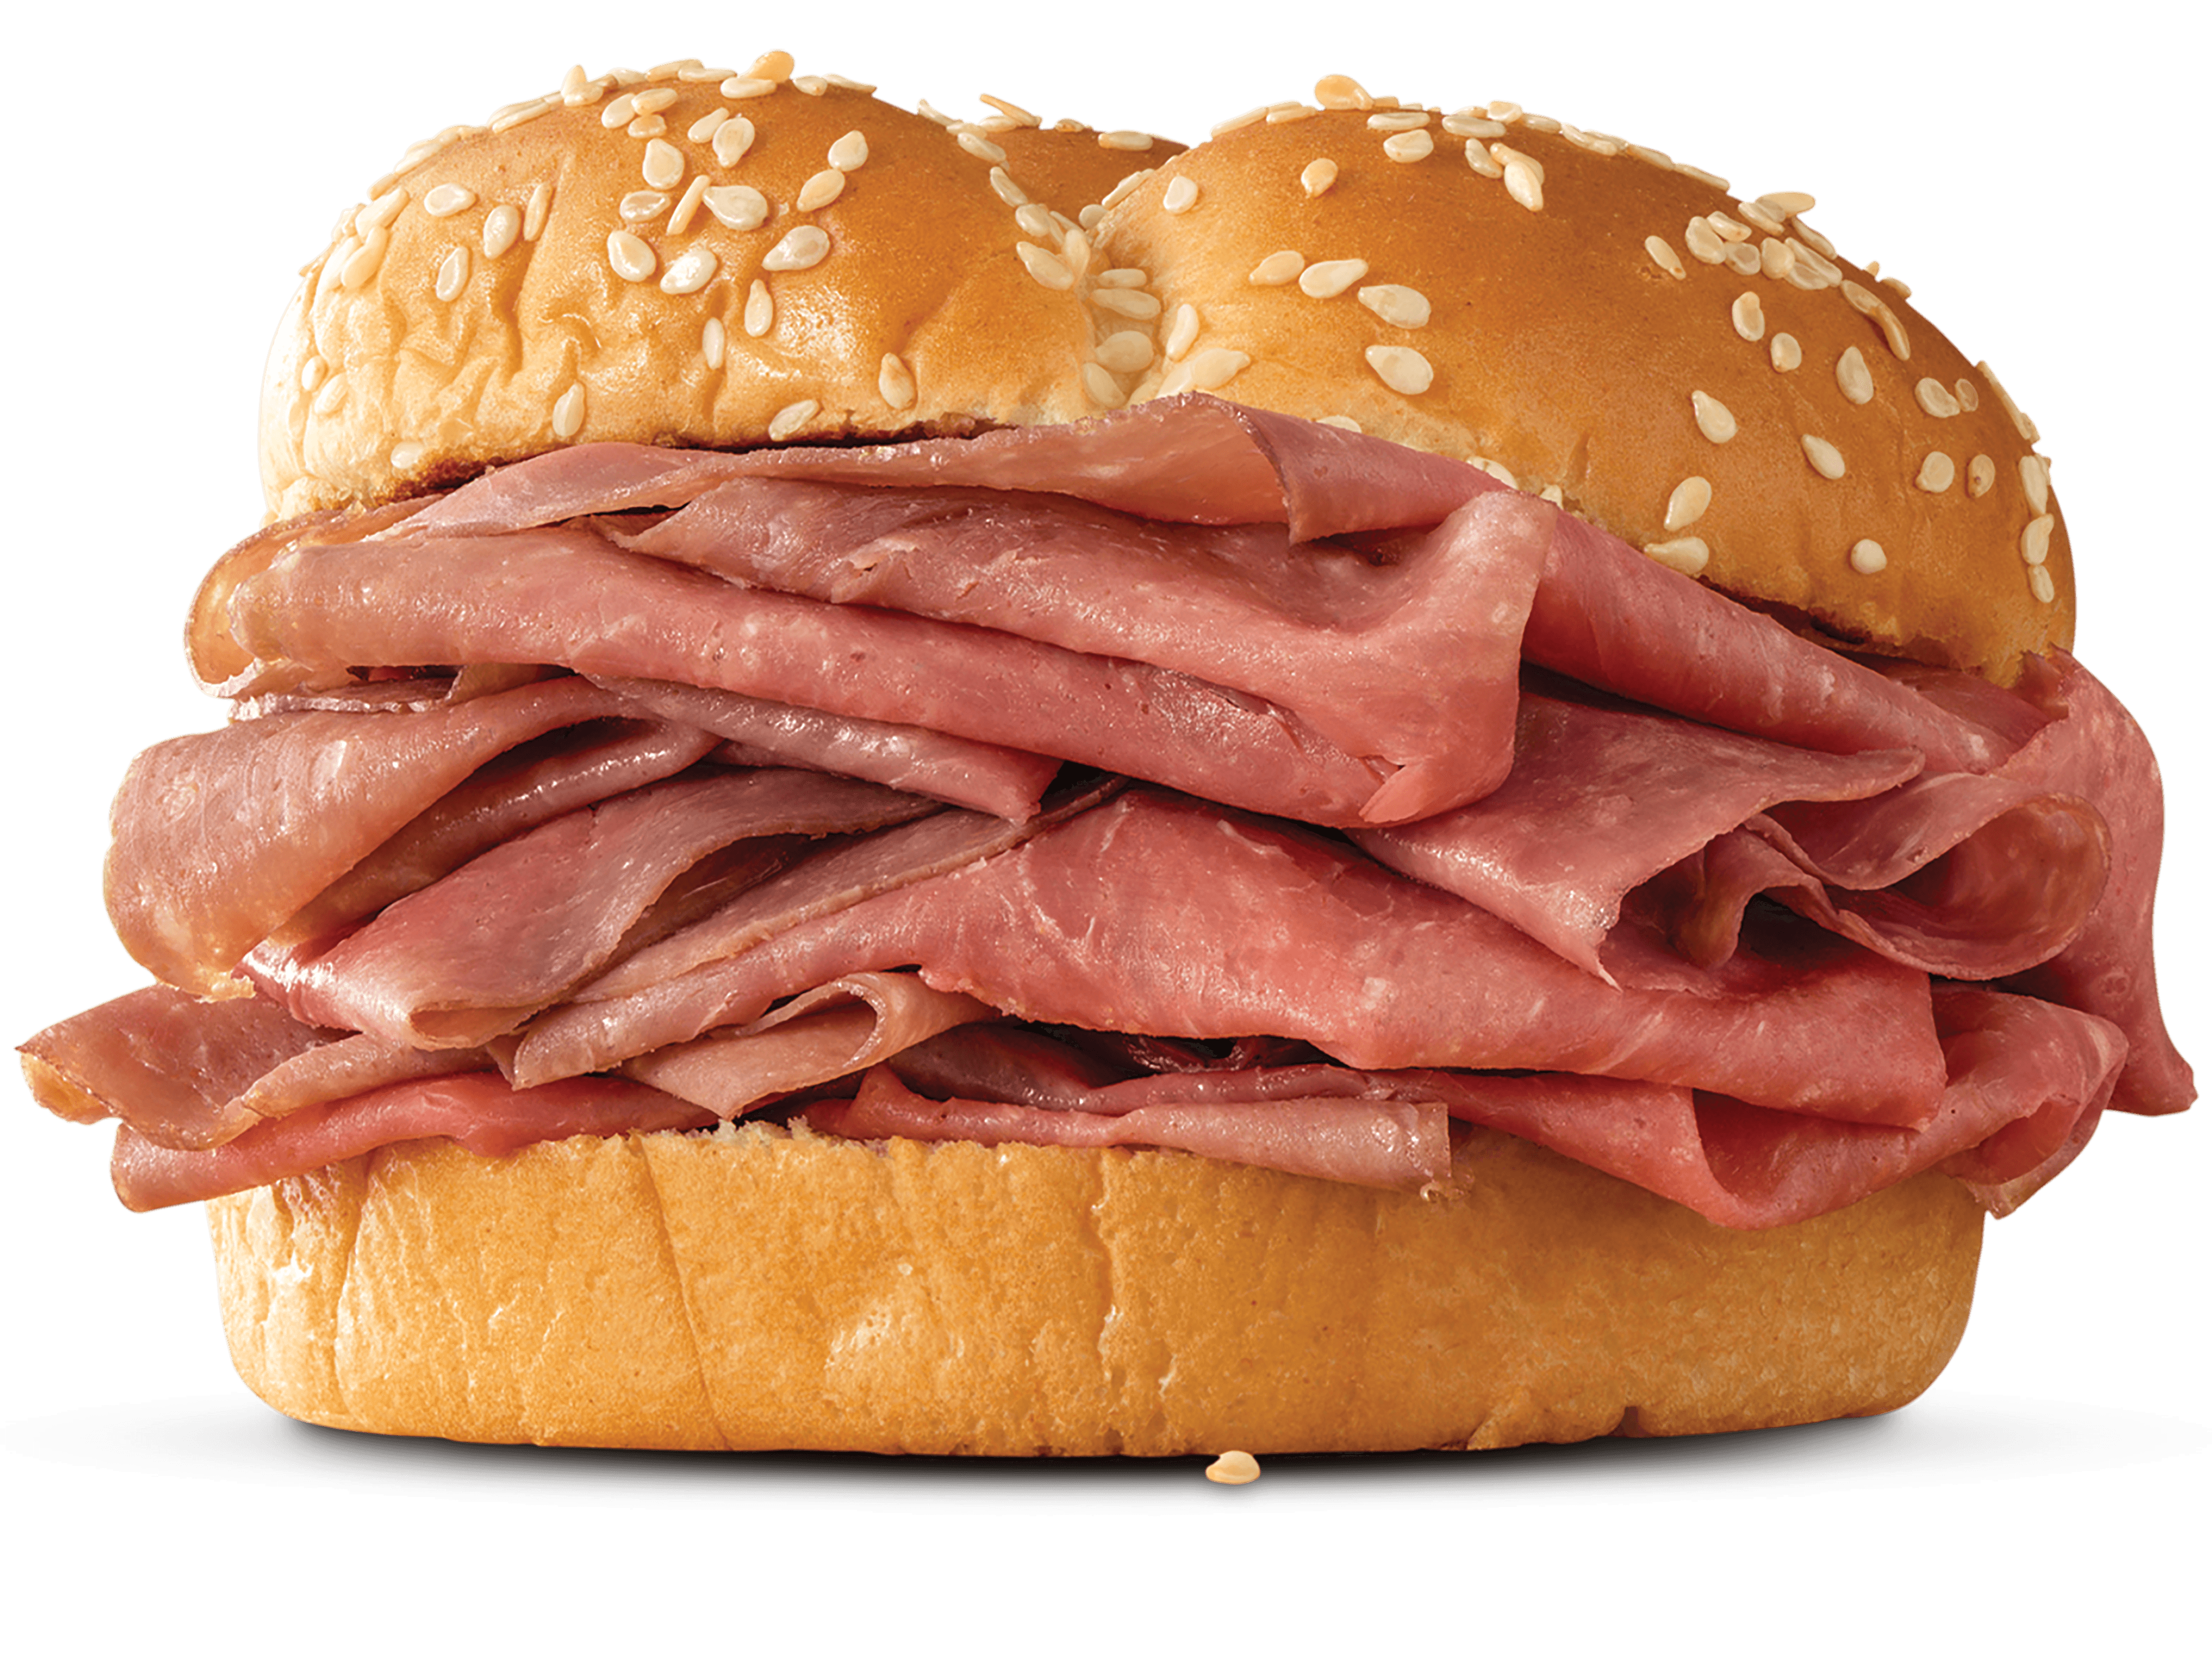 Calories in Arby's Classic Roast Beef